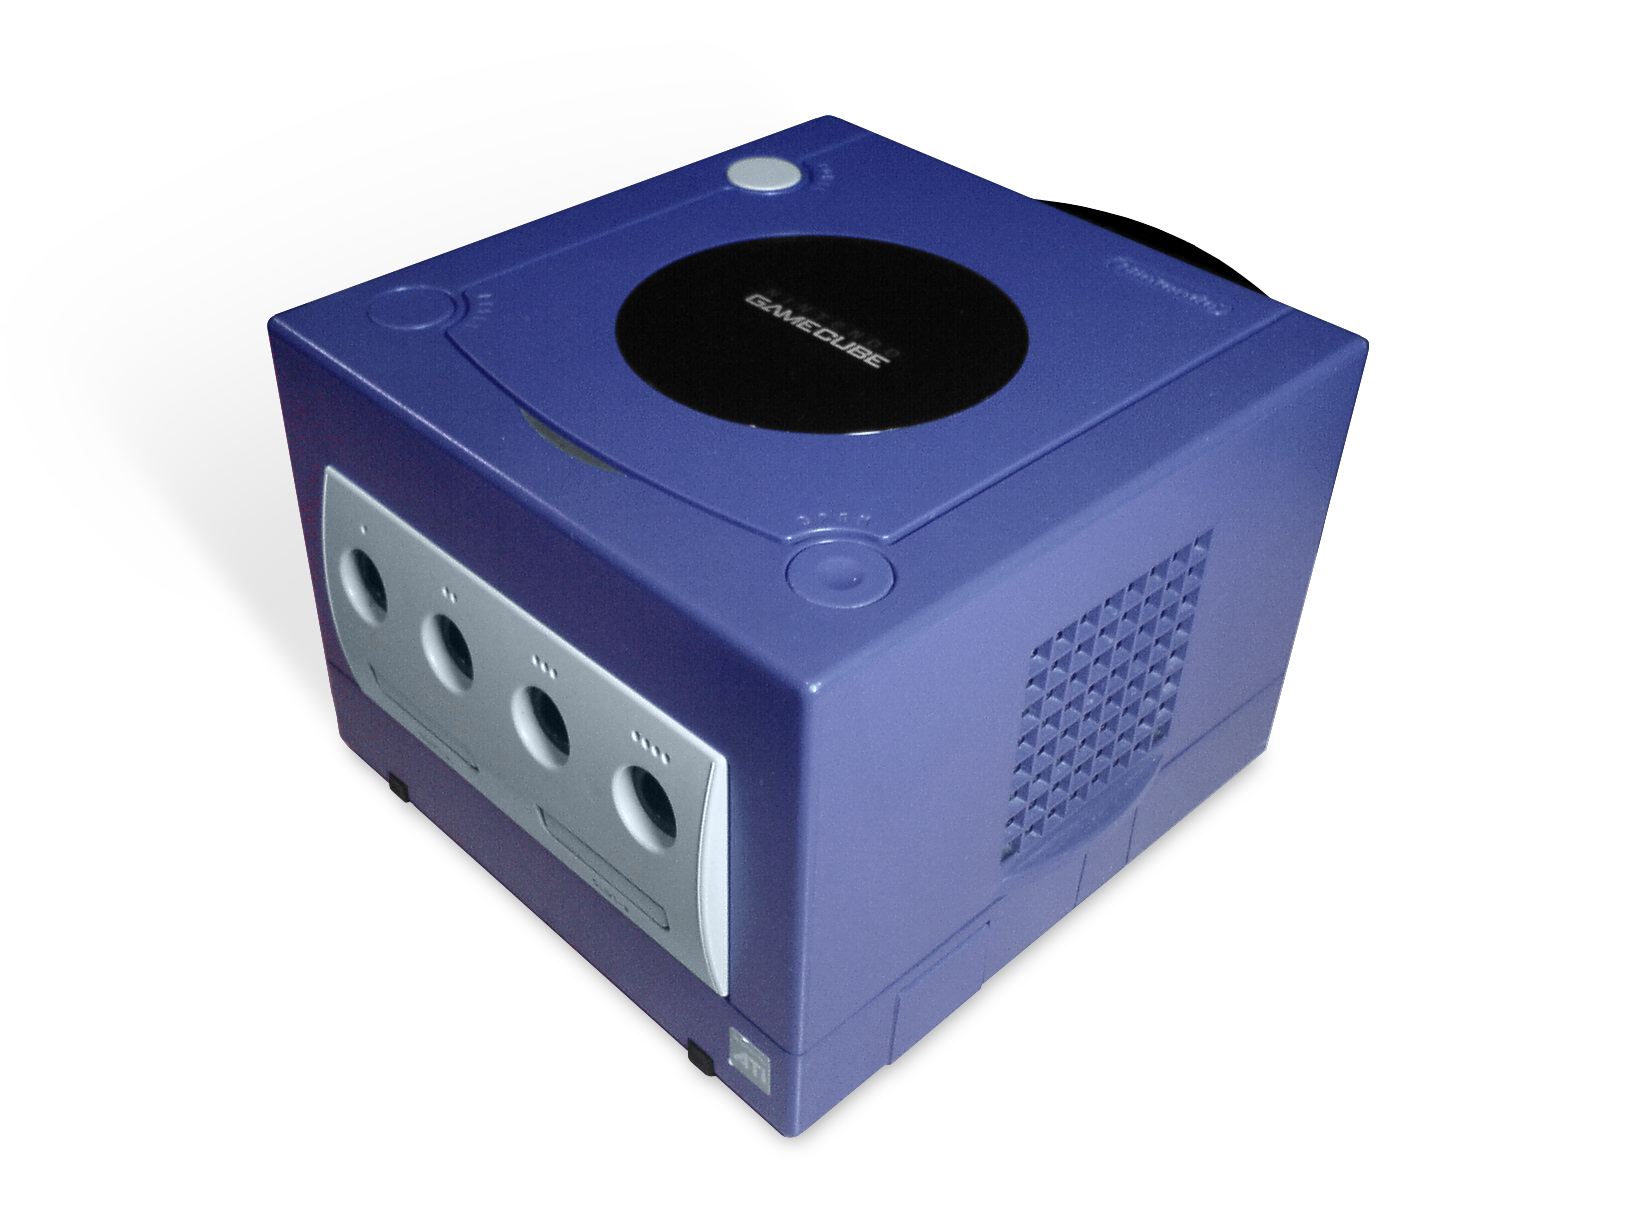 Amazing GameCube Pictures & Backgrounds